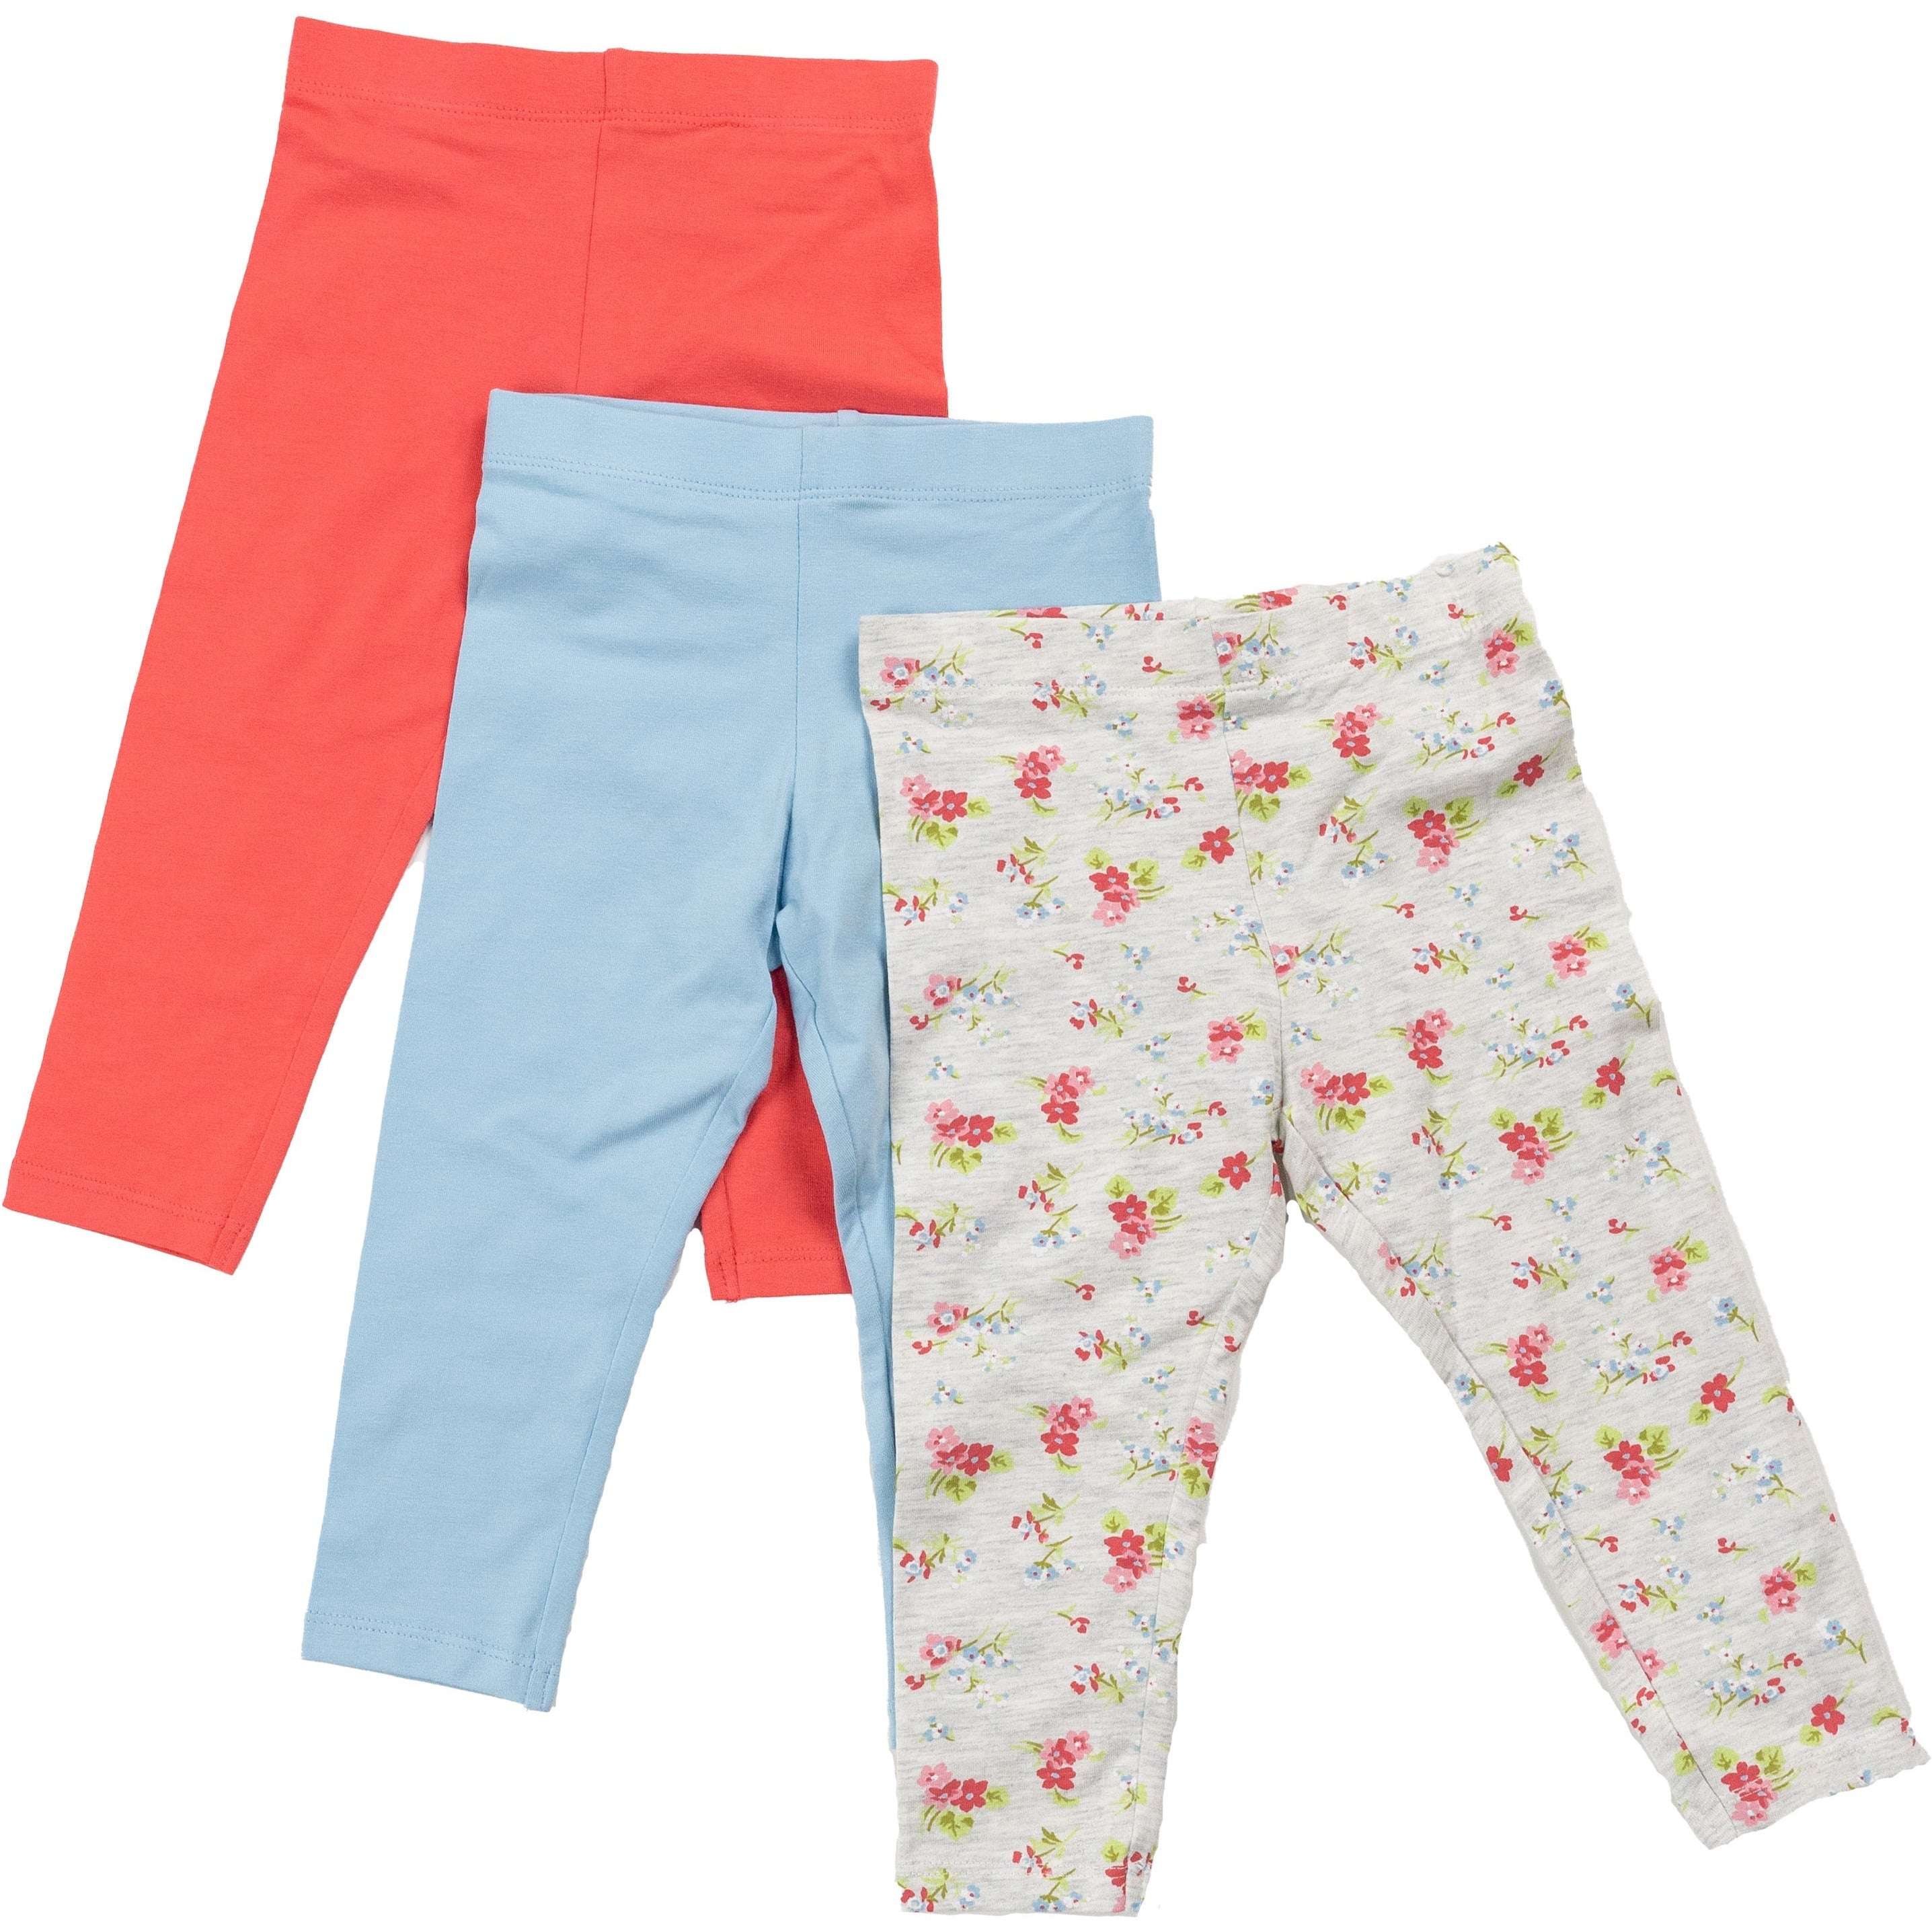 Mothercare Street Party Leggings Set of 3 Peach/Blue/Floral E803 Age- 9 Months & Above